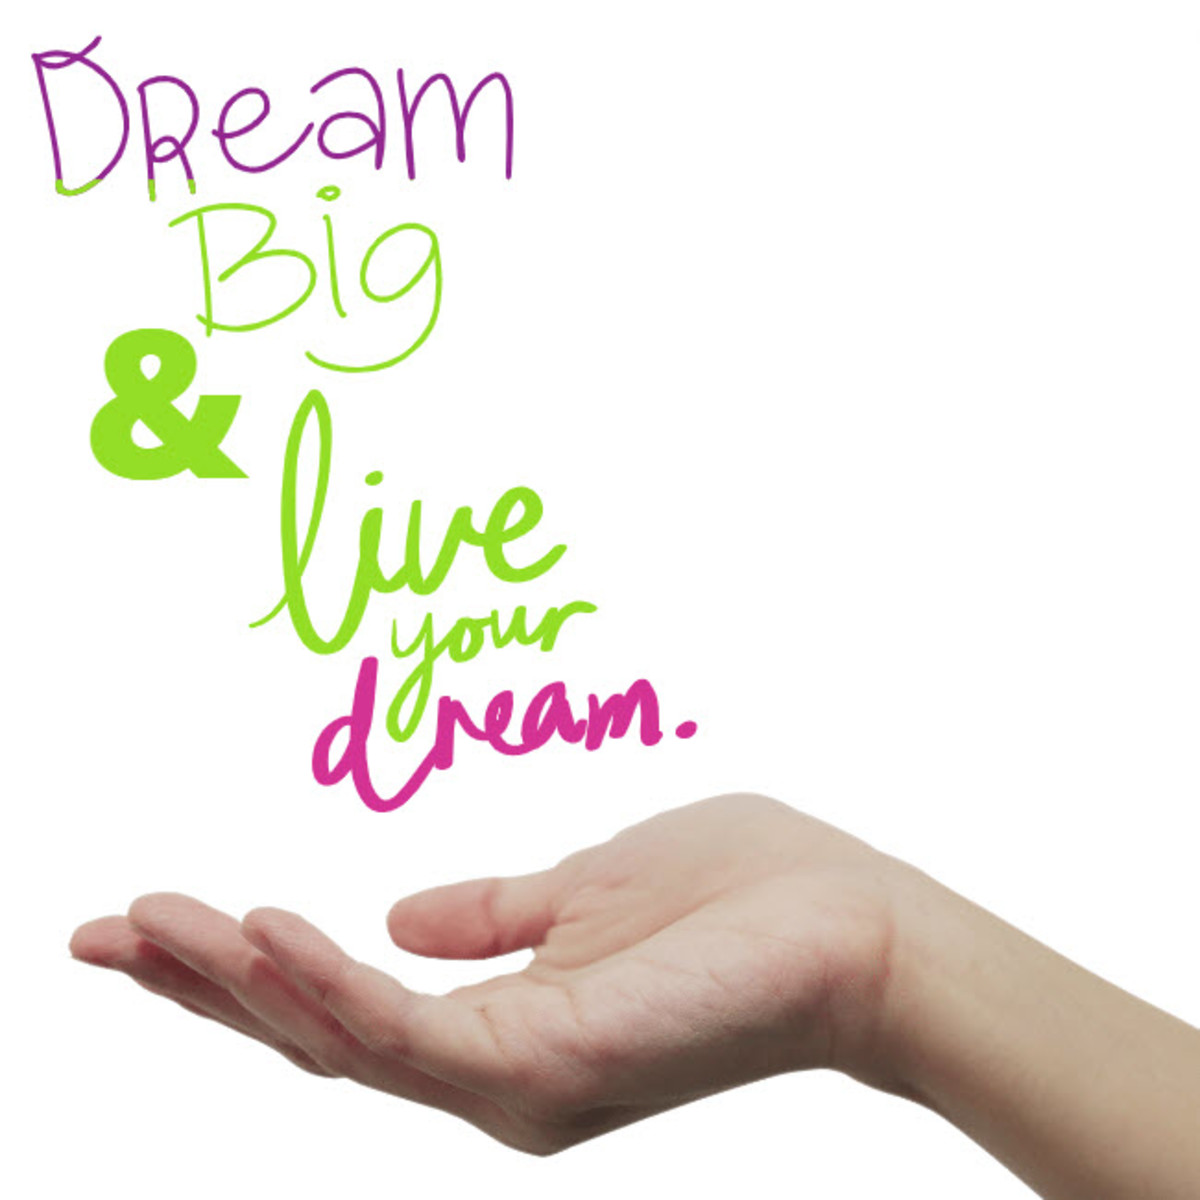 A hand reaching out with open palm up, with the words "Dream big and live your dream."